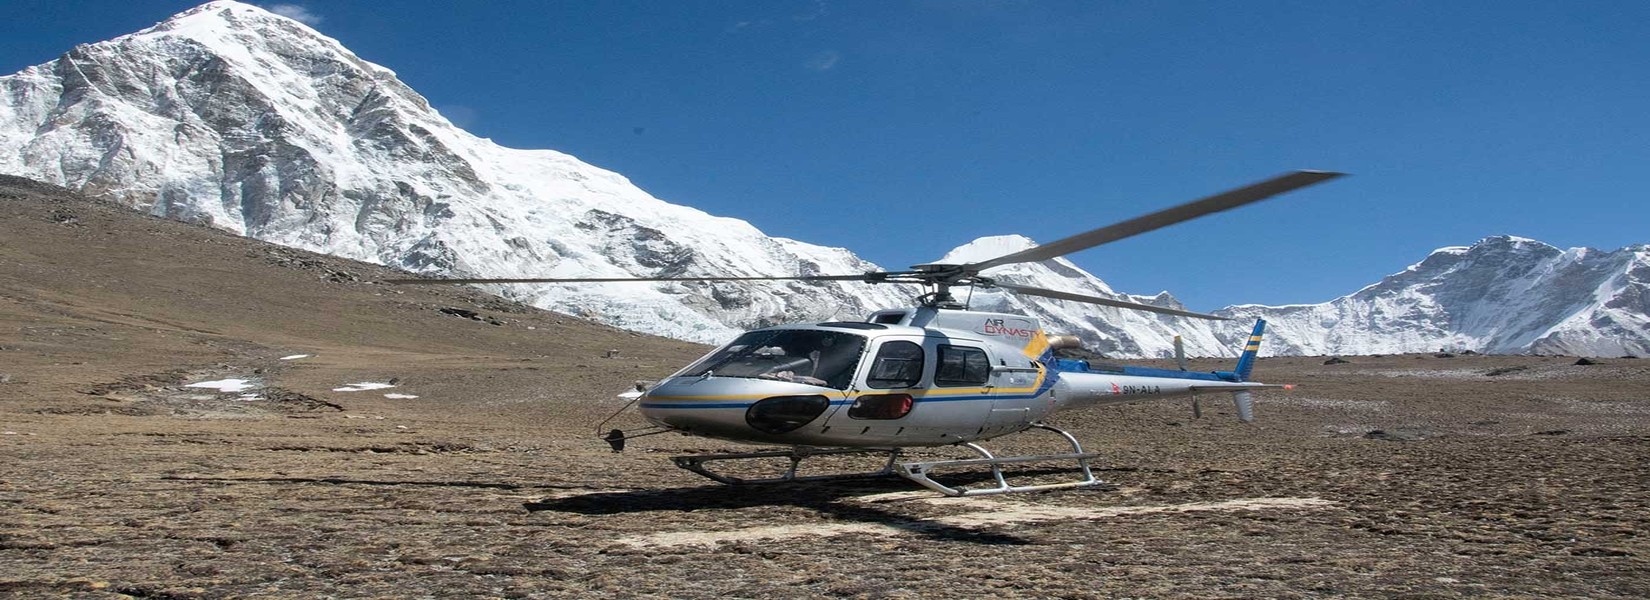 Everest Heli Tour Package | EBC Heli Tour Package Cost